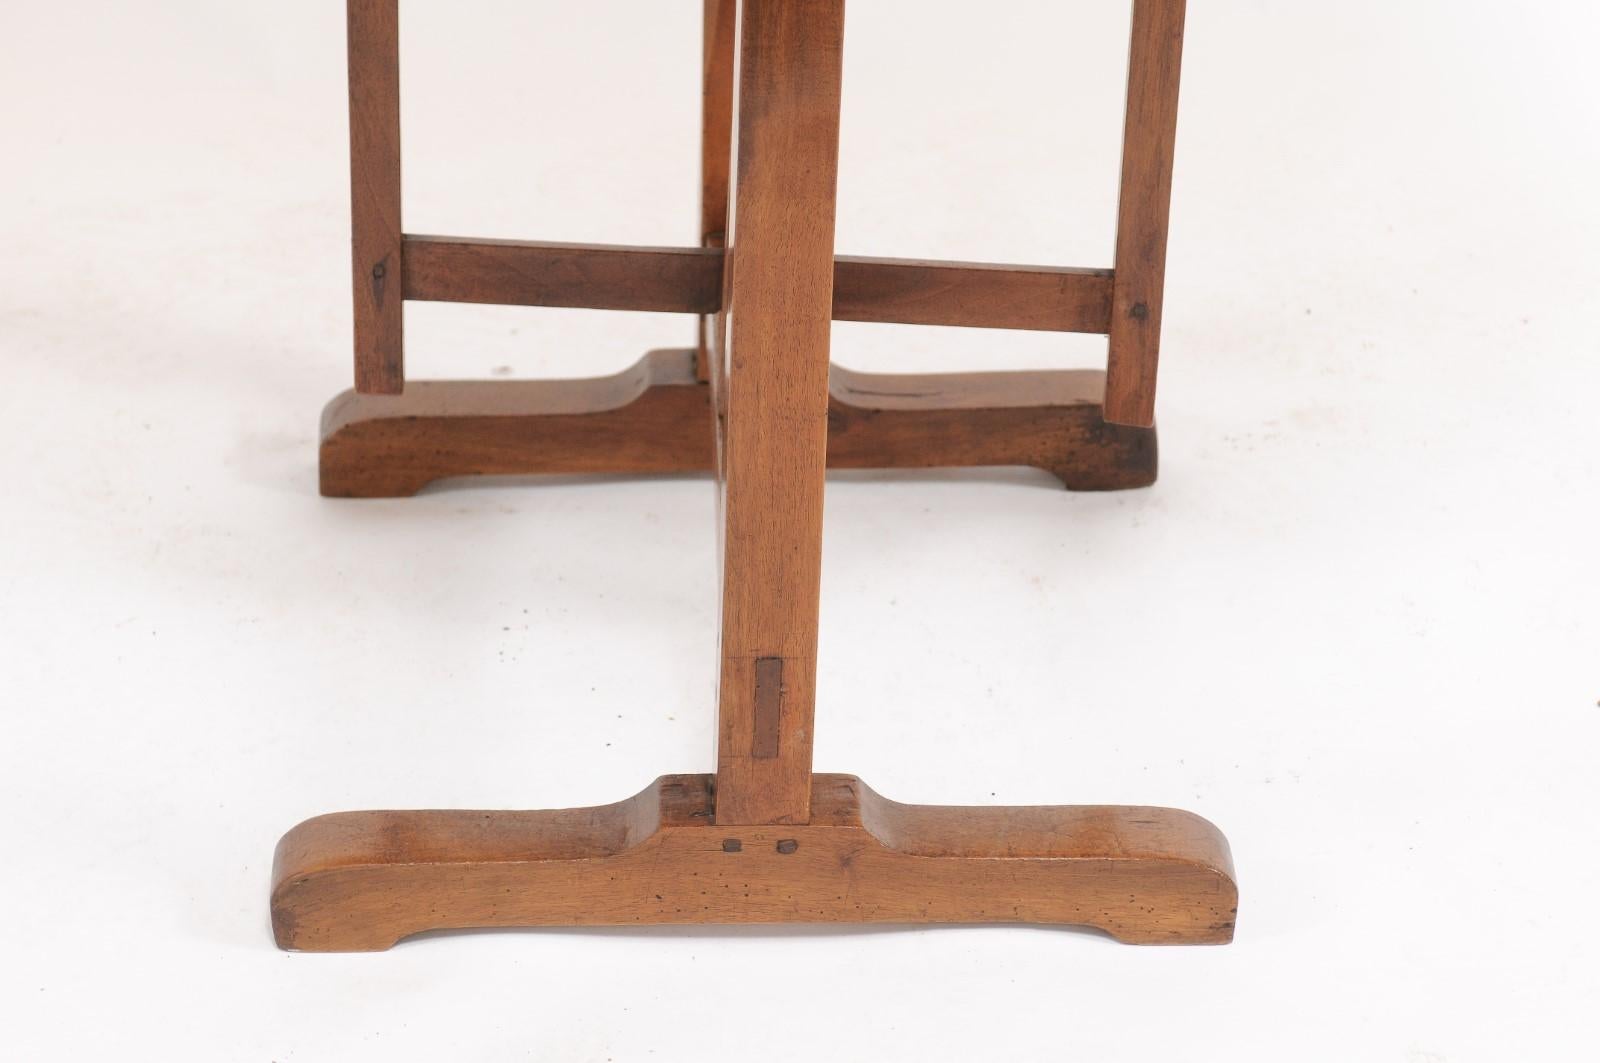 A rustic French solid walnut wine tasting table from the early 20th century, with round tilt-top and trestle base. Born in Southern France during the early years of the 20th century, this charming walnut wine tasting table features a circular